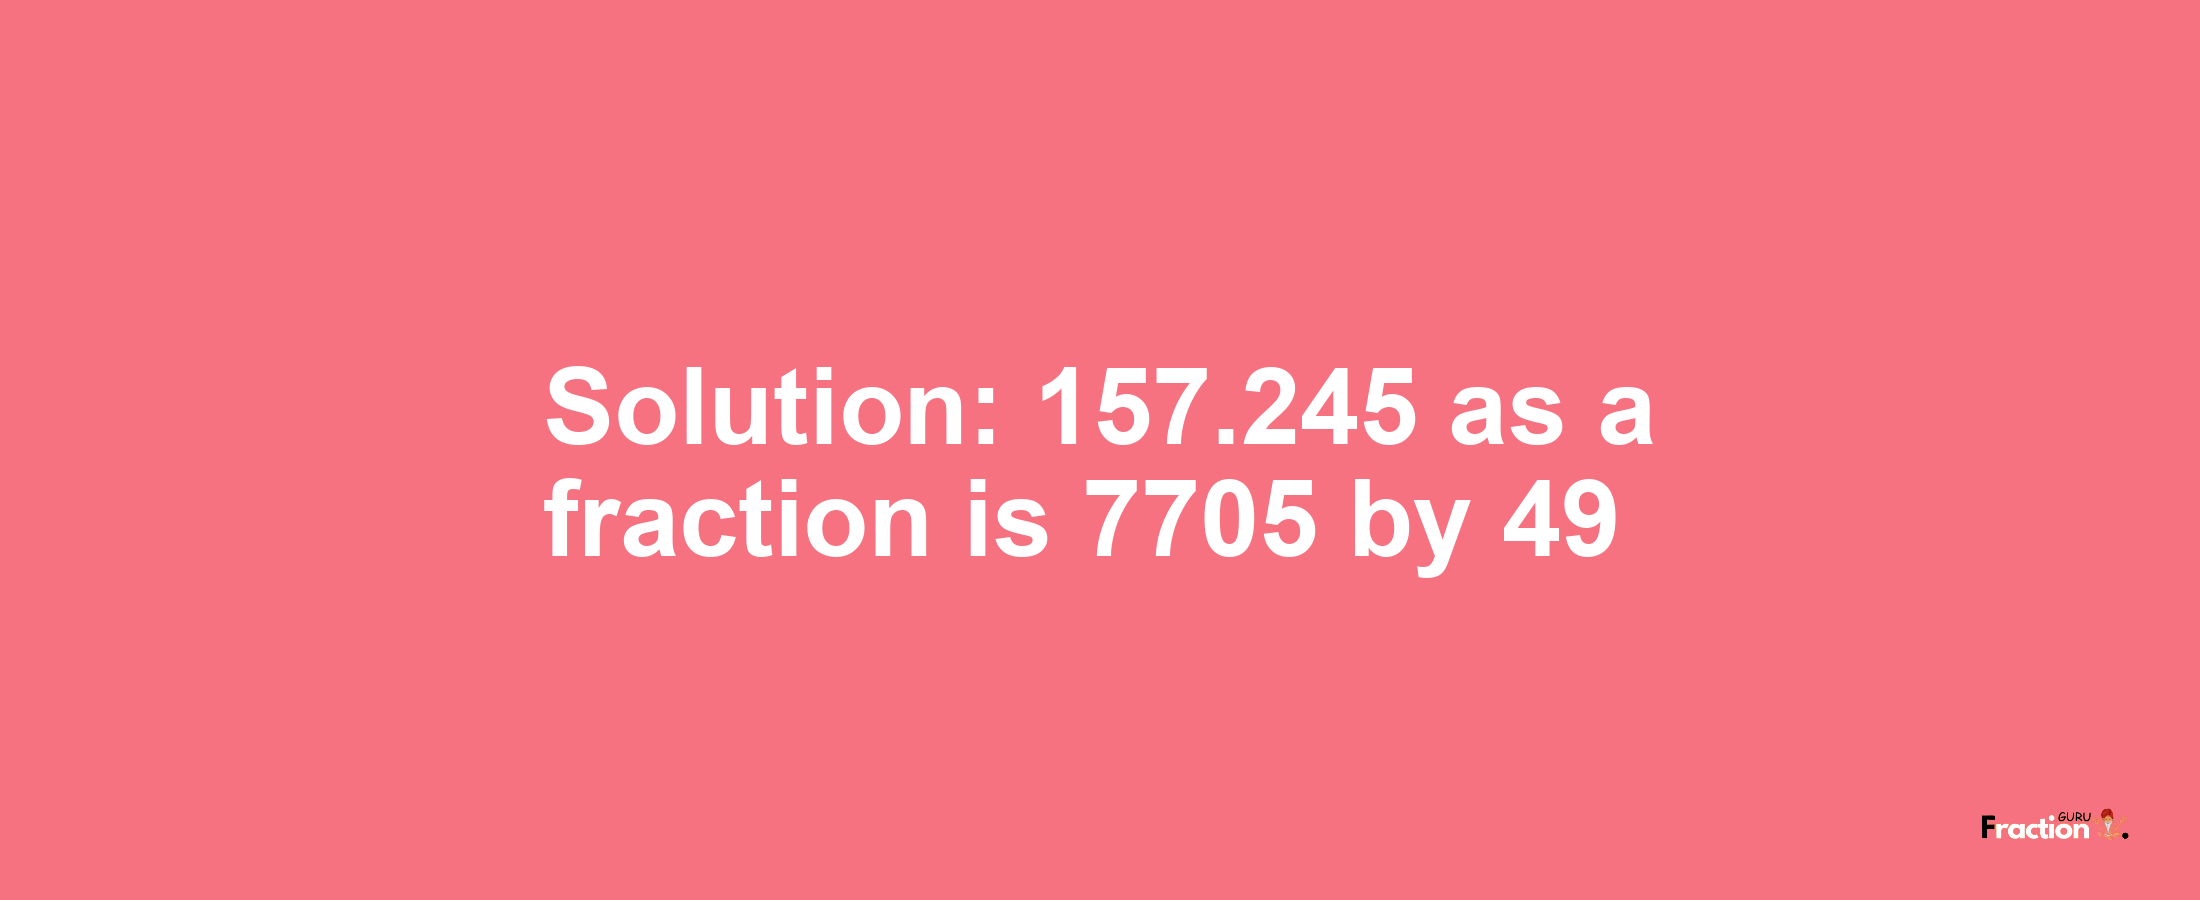 Solution:157.245 as a fraction is 7705/49